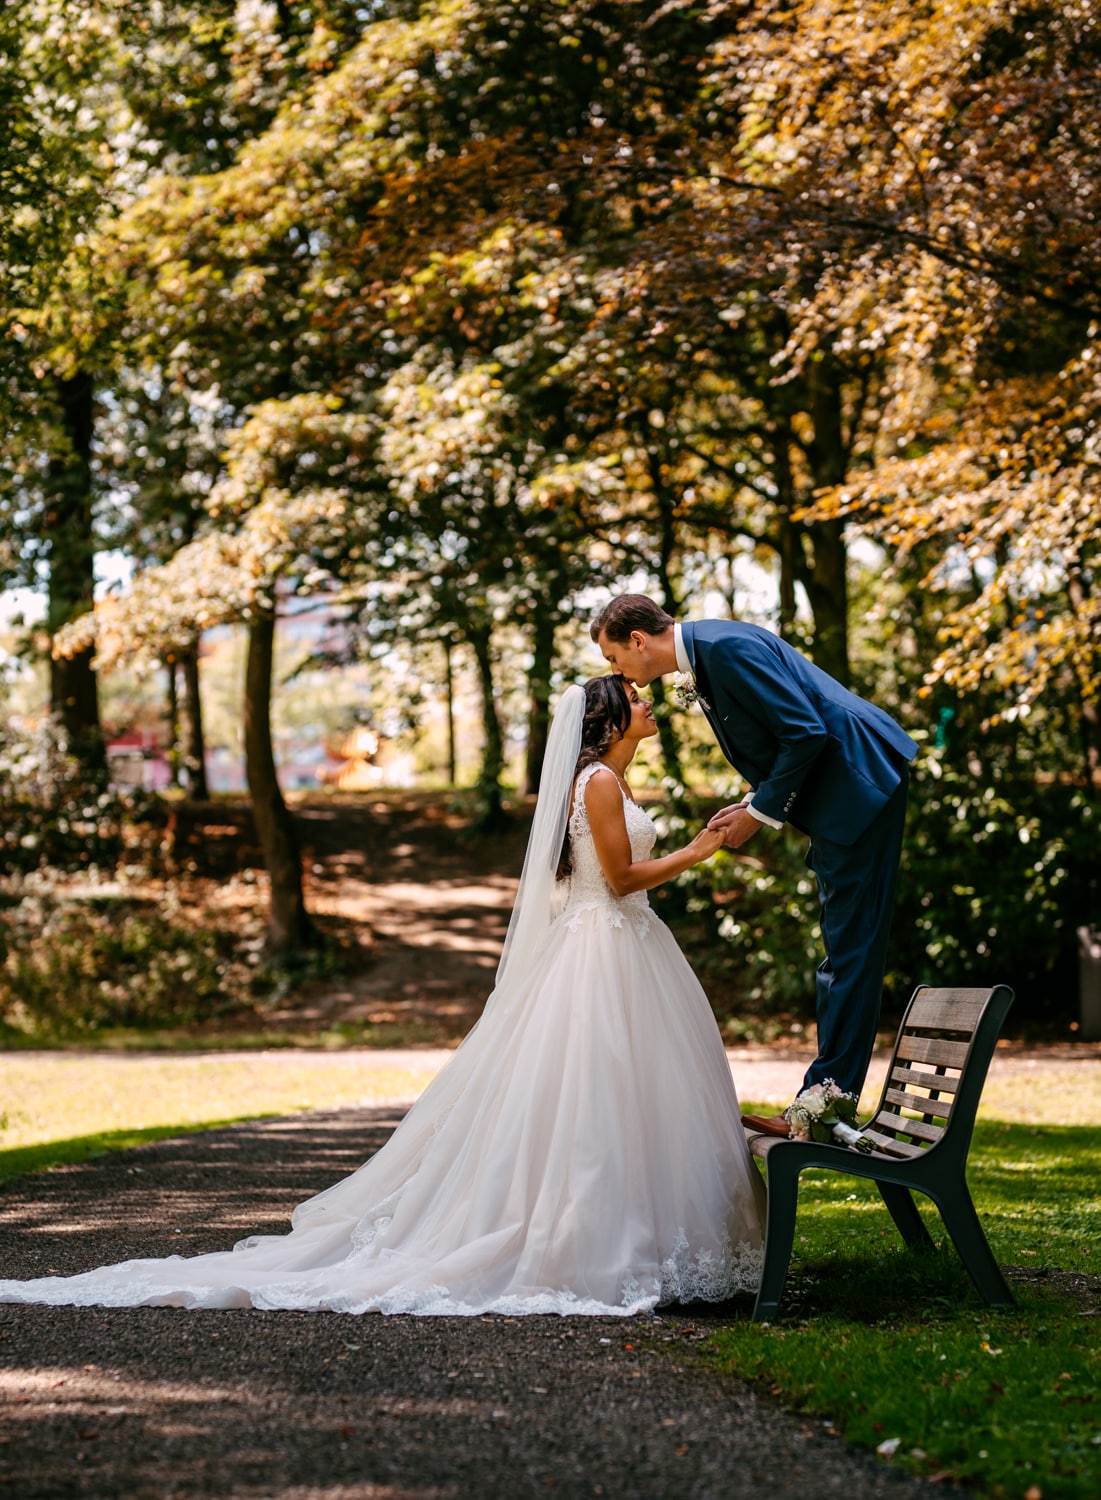 A bride and groom kissing each other passionately on a park bench, capturing the beautiful moment through the lens of an experienced wedding photographer.